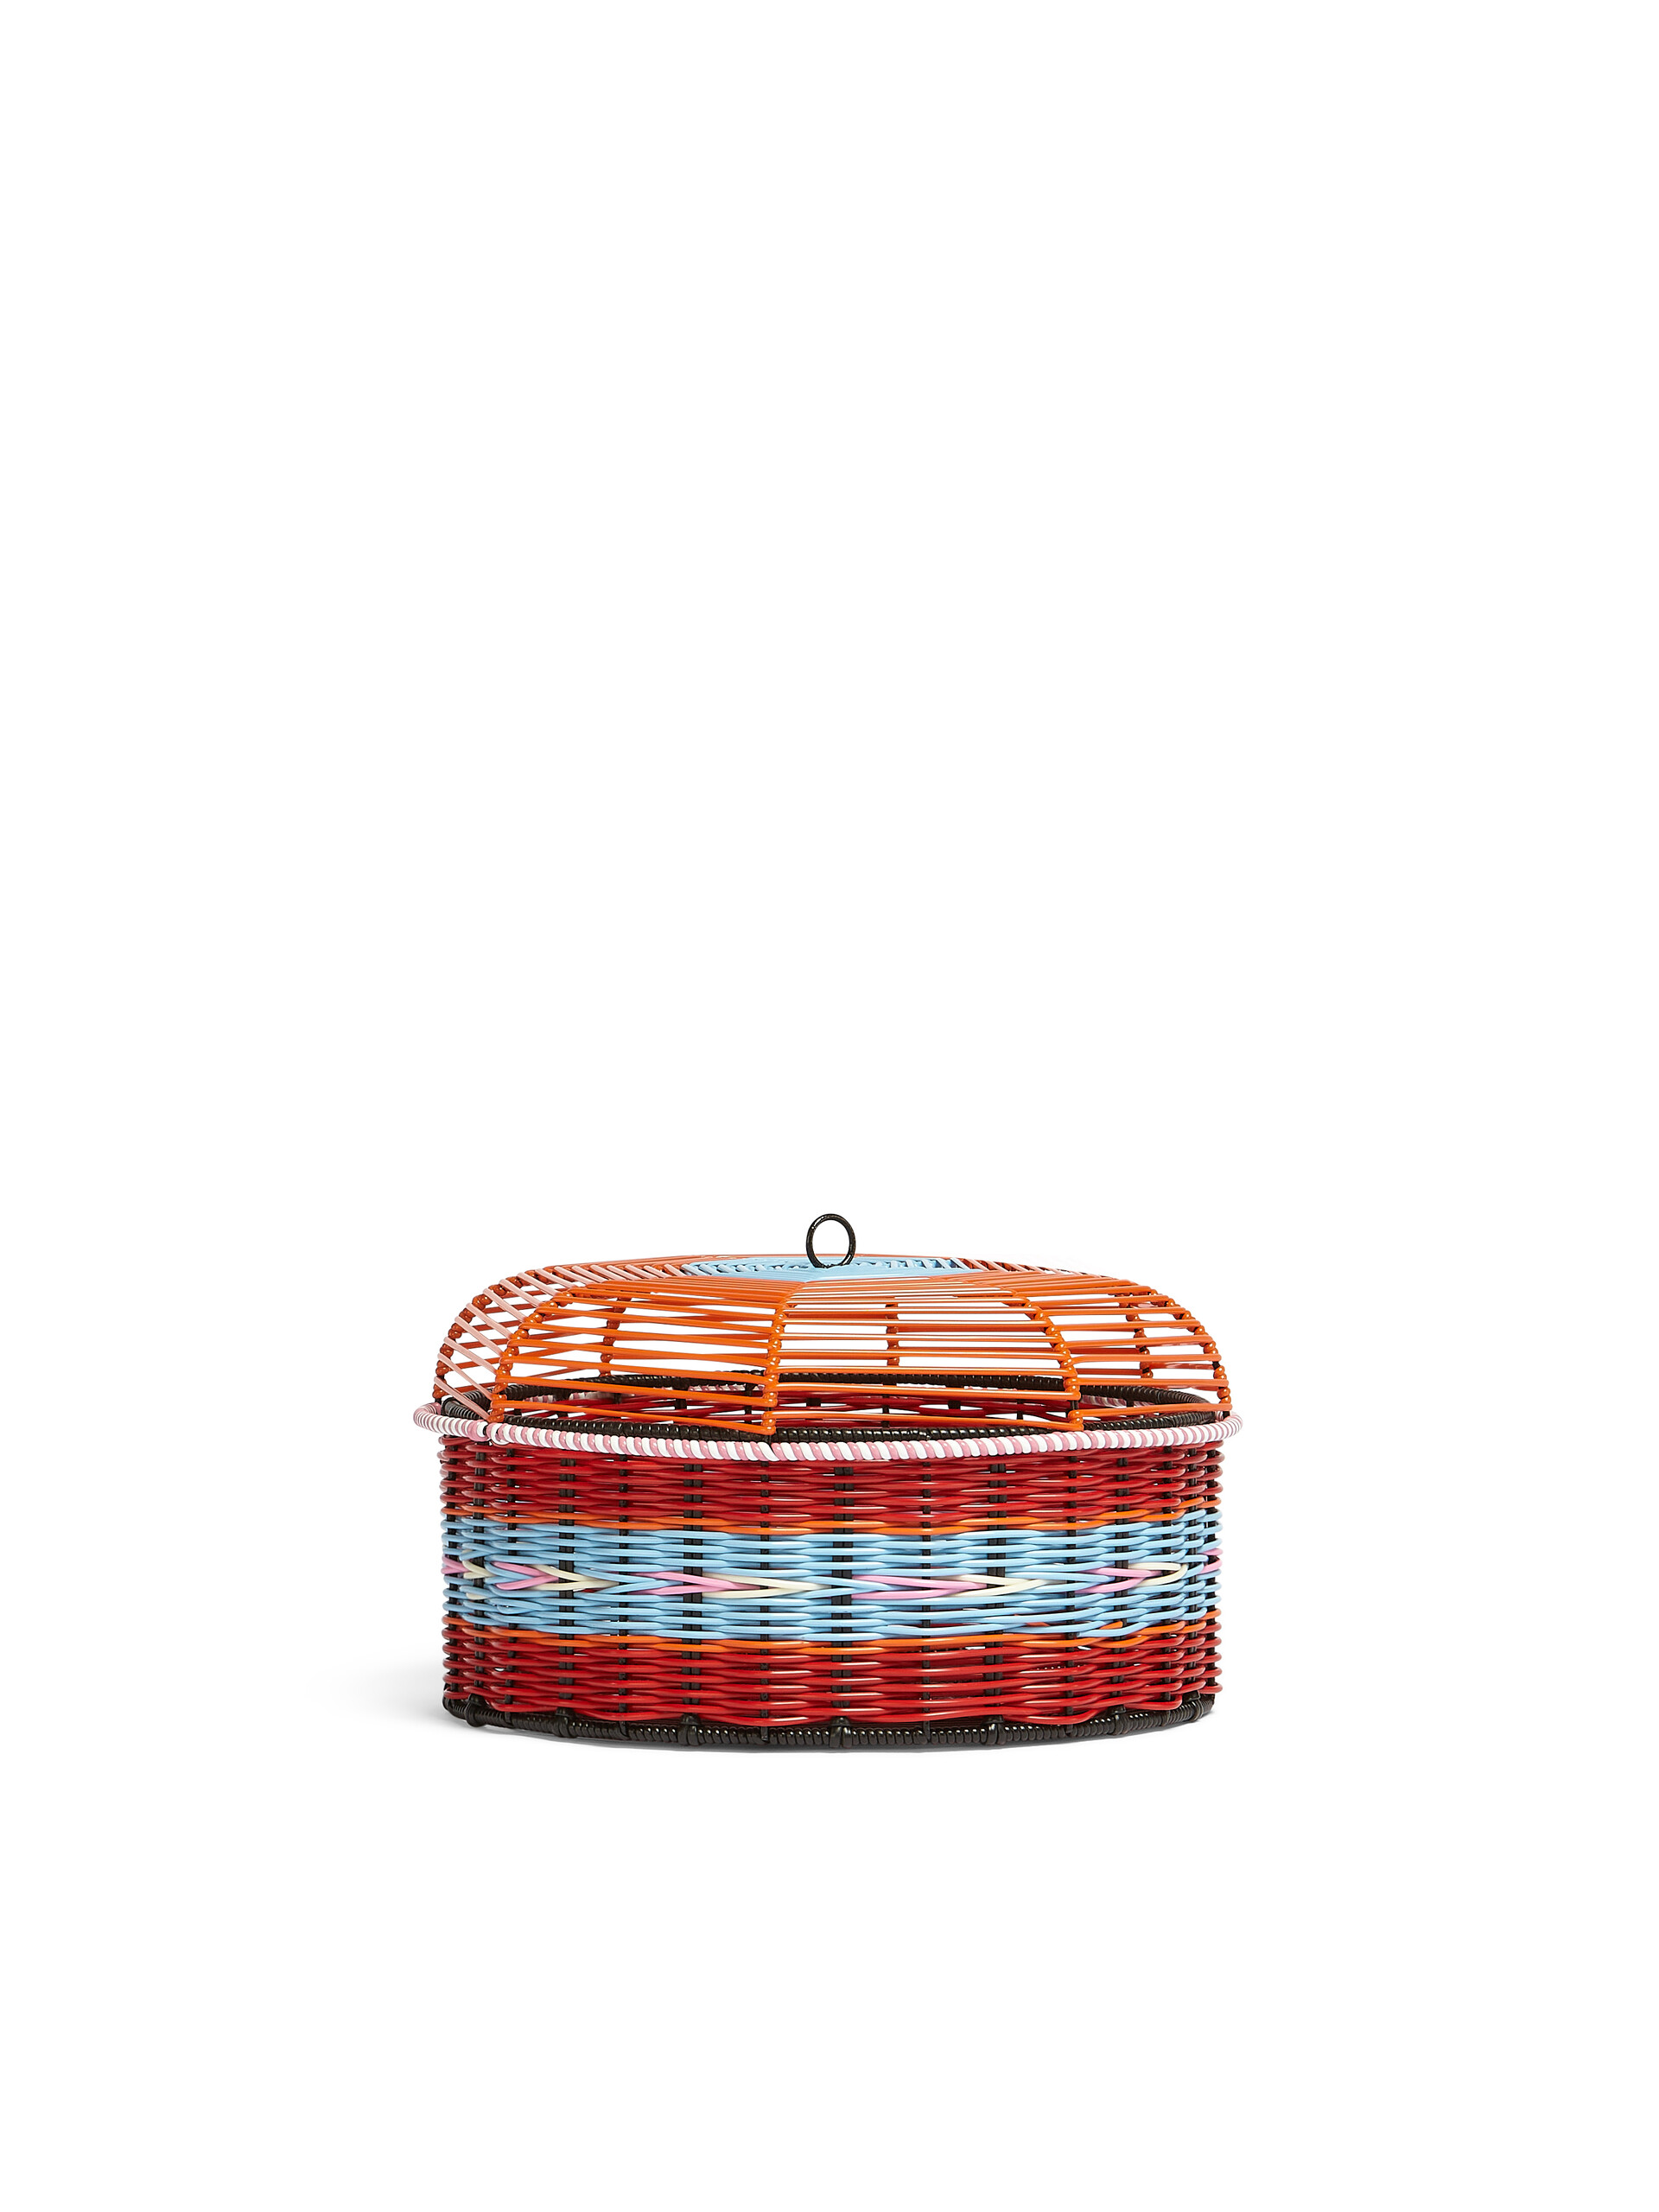 MARNI MARKET red large case - Accessories - Image 2